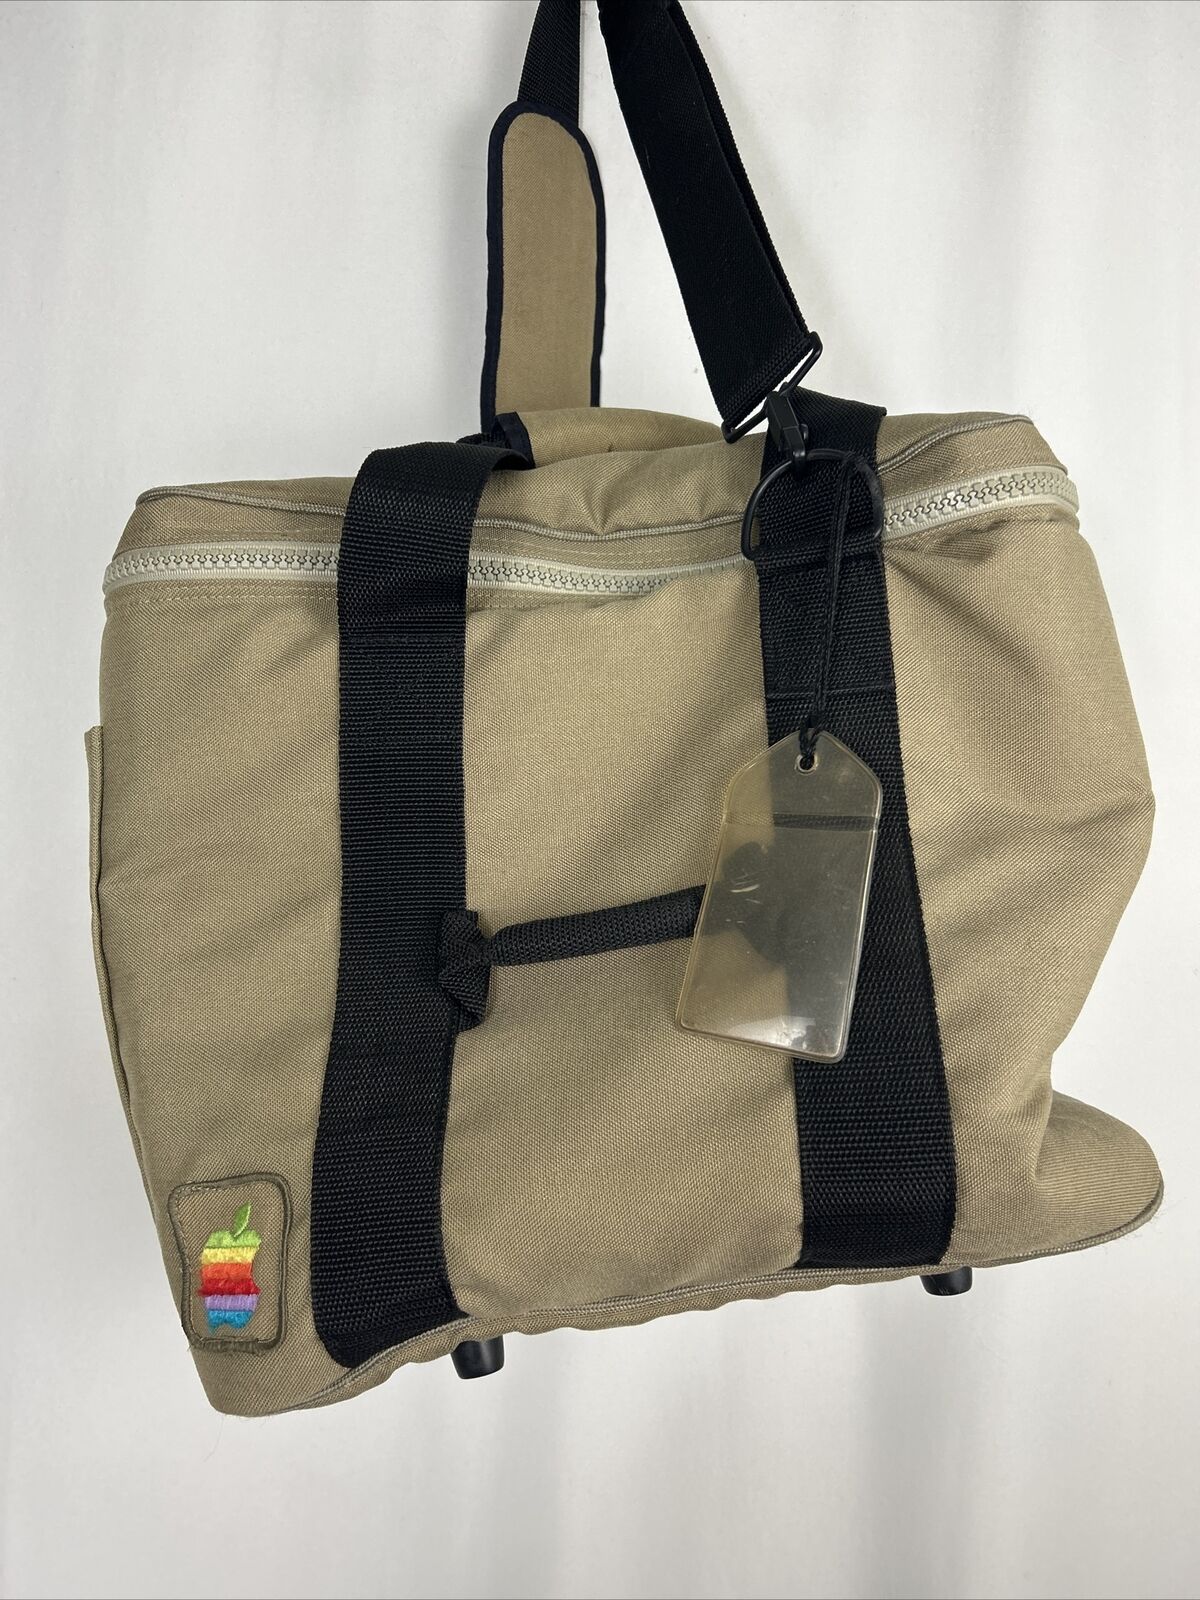 APPLE Vintage 1980s Macintosh Computer Travel Bag Tote Carry Case With Rainbow 